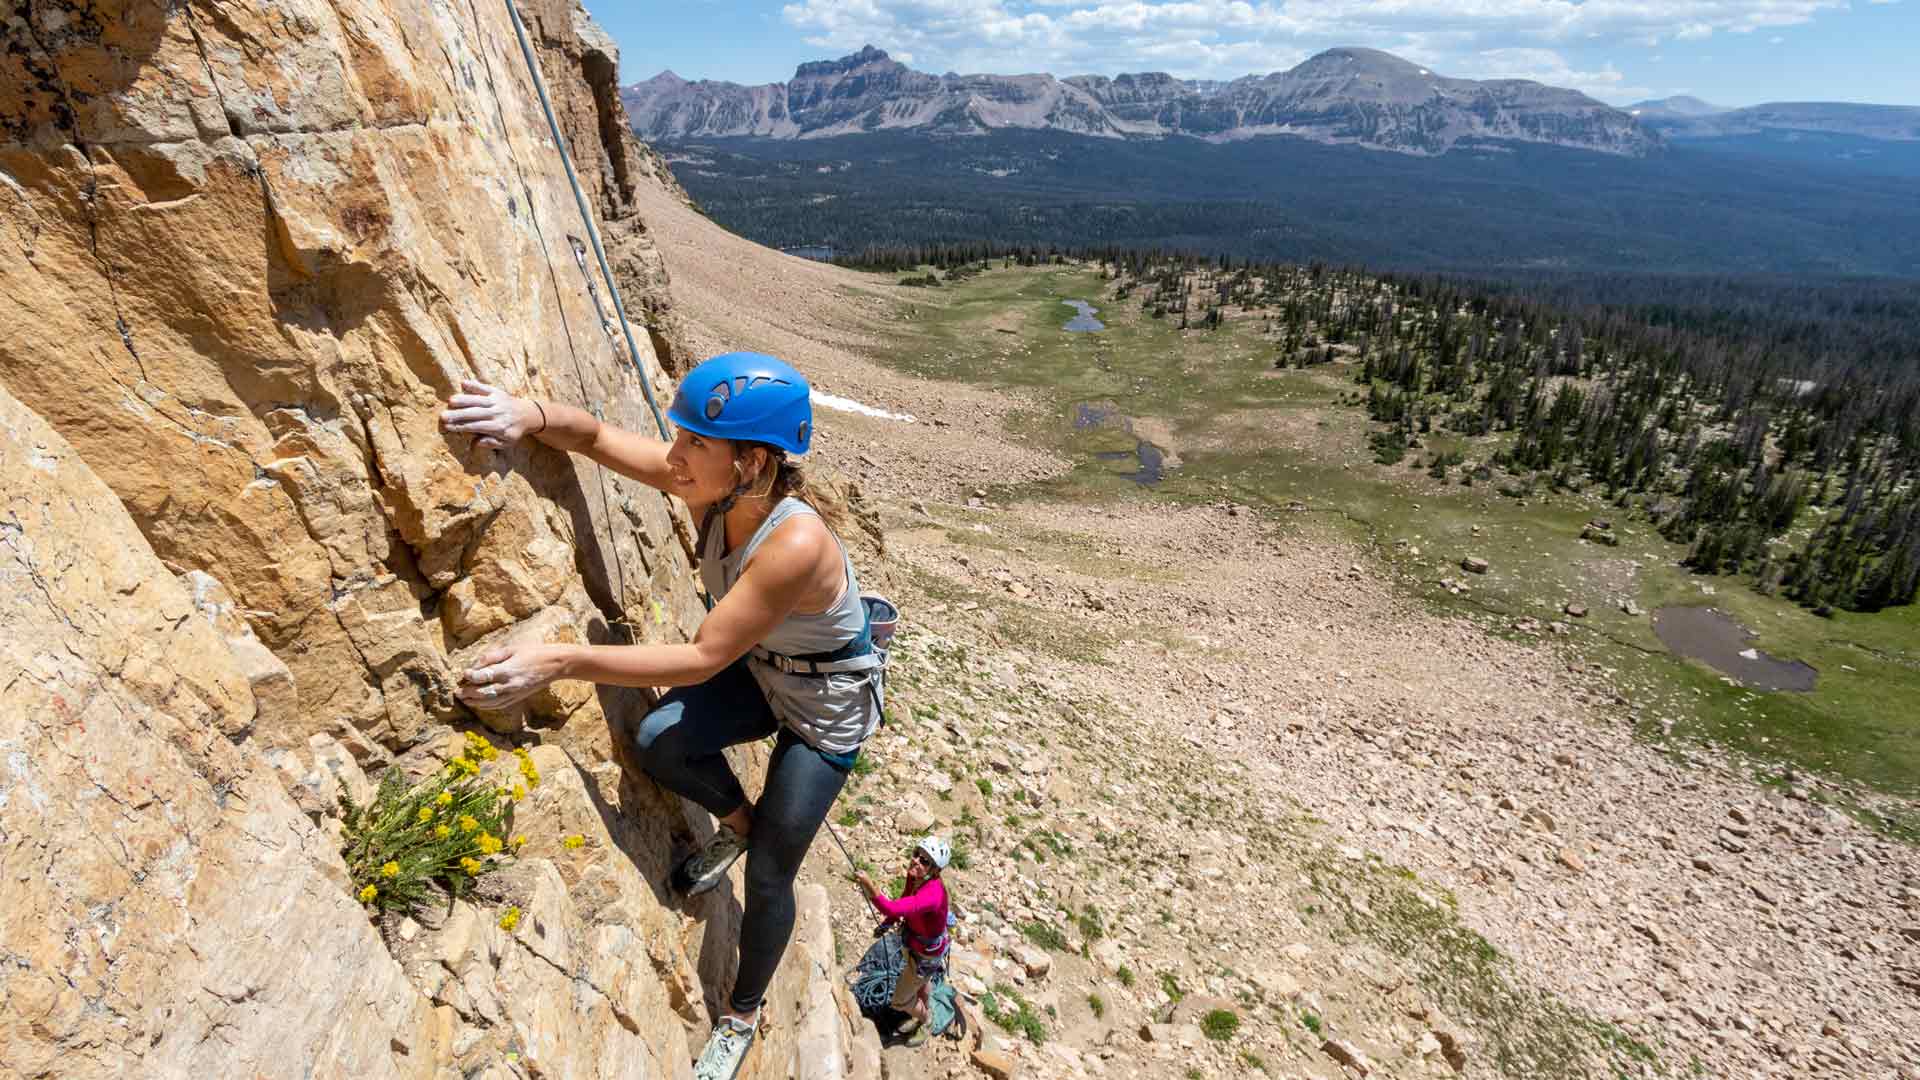 A guide belays as a climber ascends a rock face in the Uinta mountains outside Park City, UT